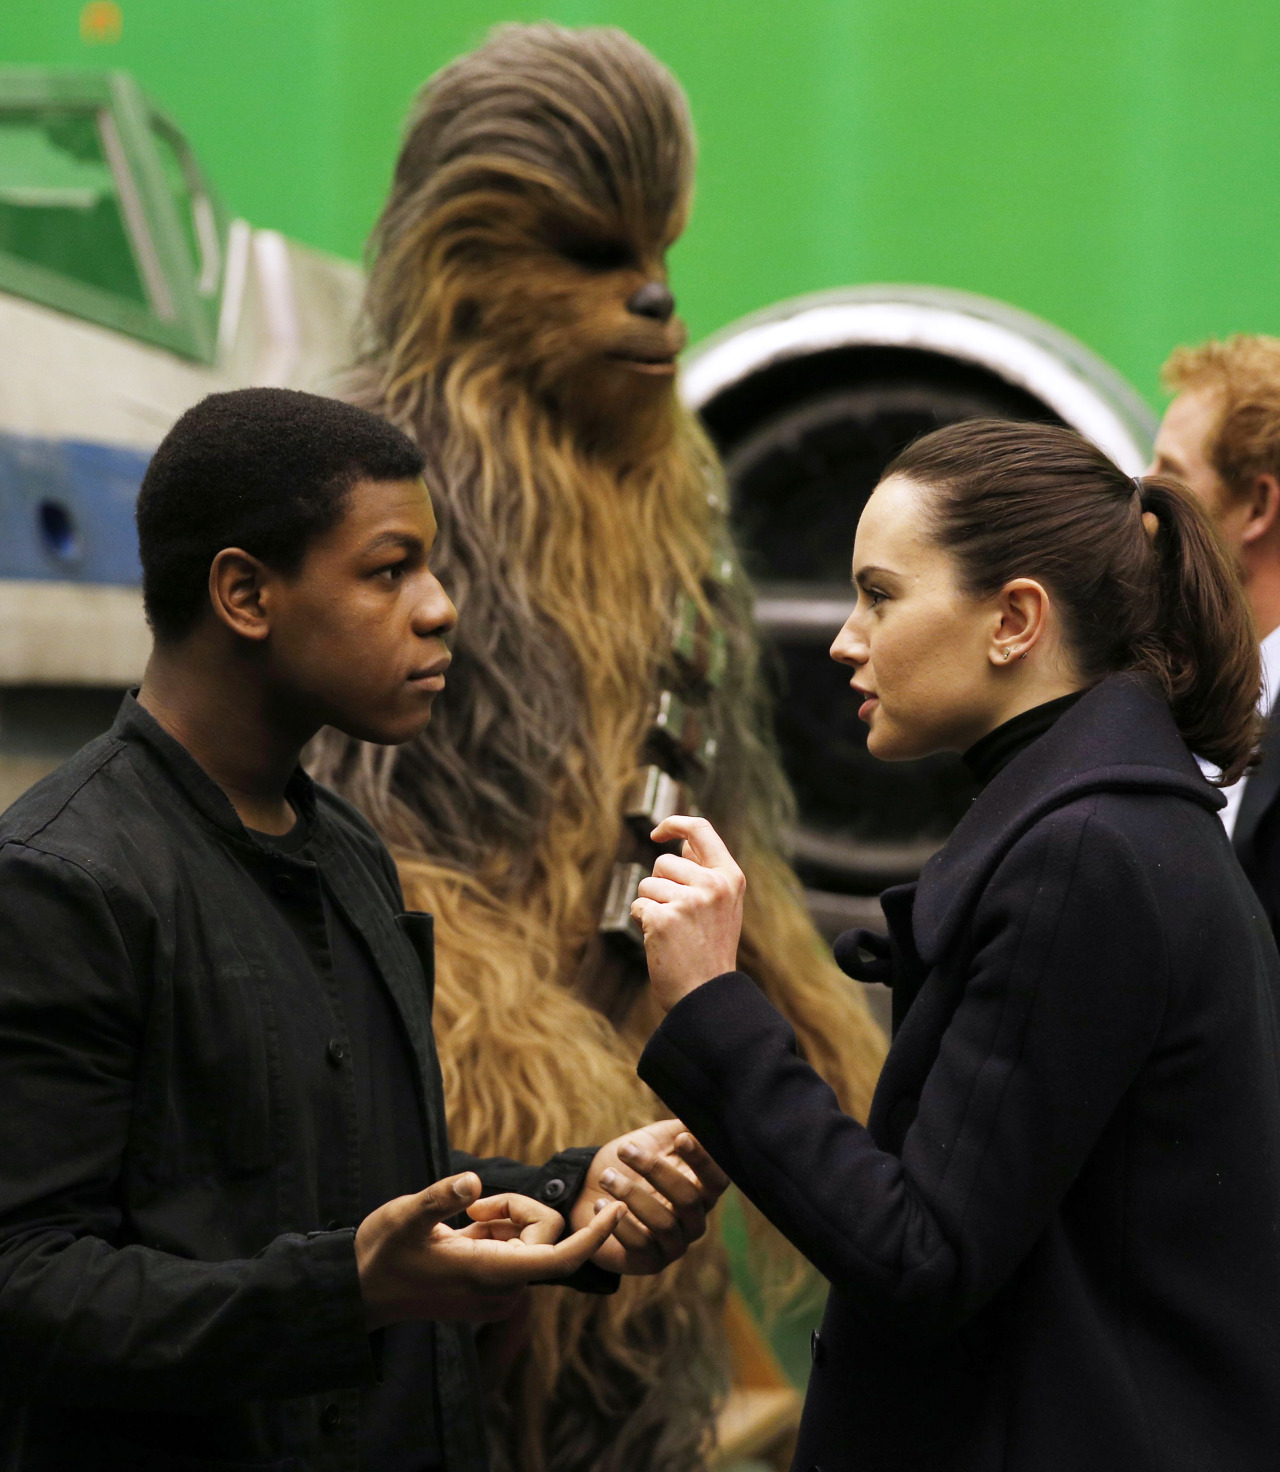 celebritiesofcolor: John Boyega and Daisy Ridley on the set of ‘Star Wars: Episode